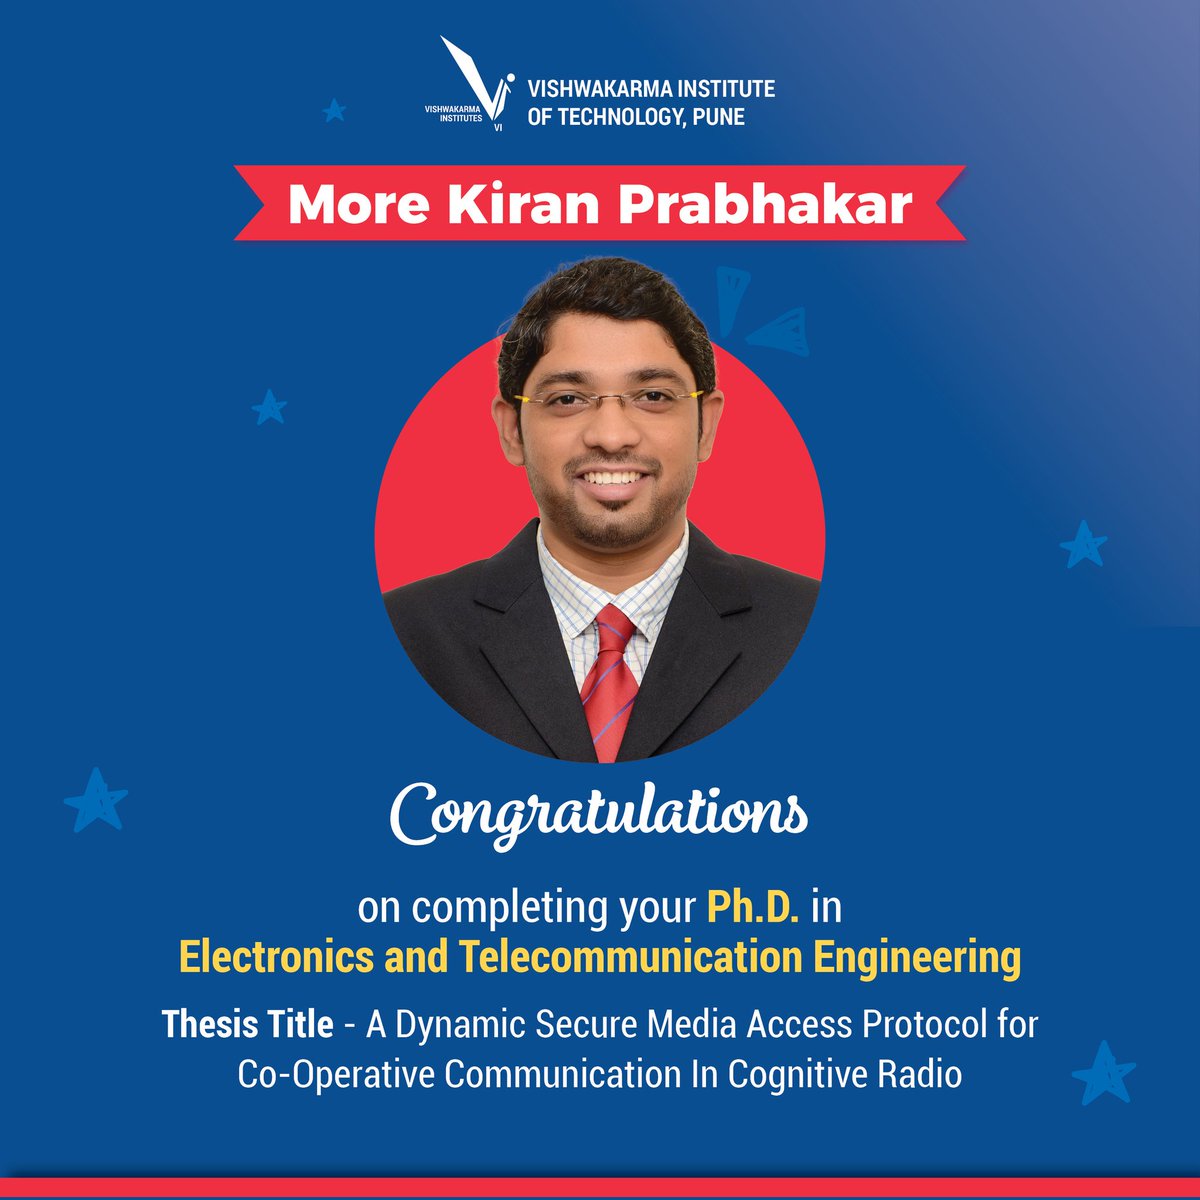 VIT, Pune is thrilled to announce a moment of pride! Congratulations to Kiran Prabhakar on completing a remarkable Ph.D. journey in Electronics and Telecommunication Engineering
#thrilled #proud #proudmoment #congratulations #phd #VITPune #vitstudents #engineeringinstitute